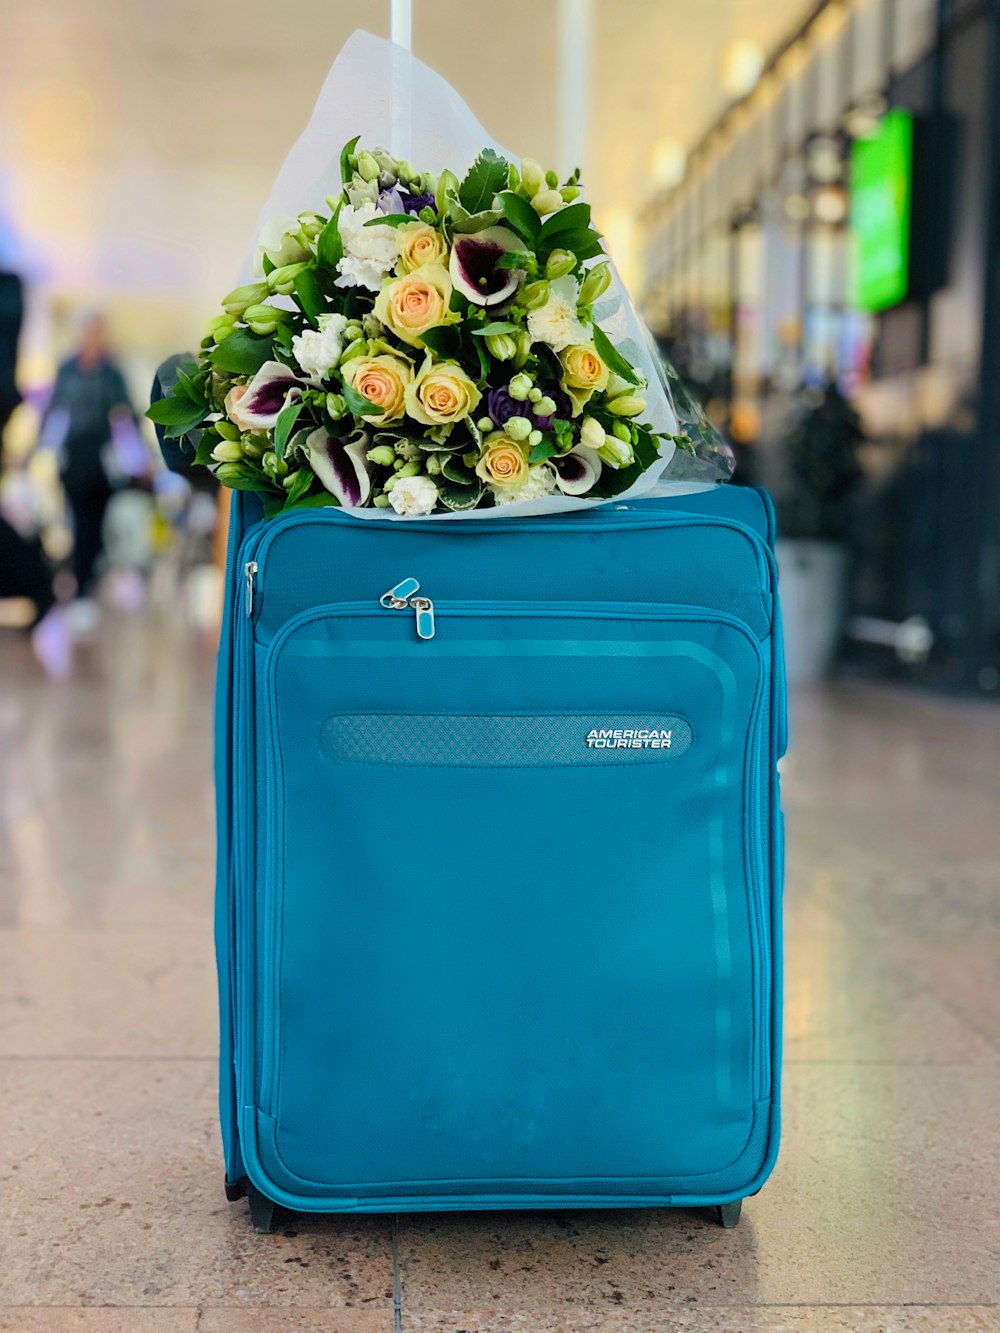 bouquet of flowers on blue luggage